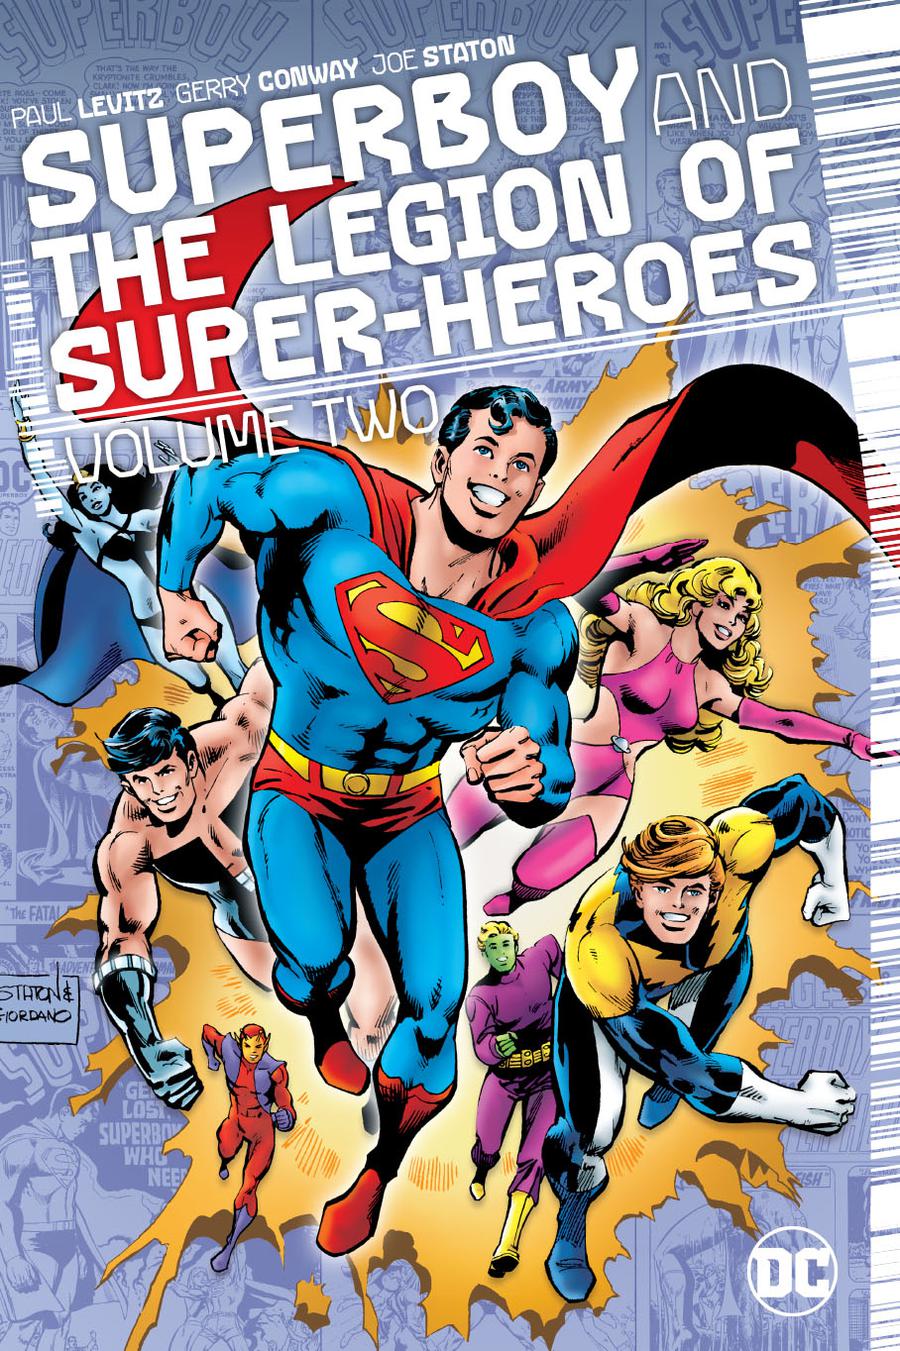 Superboy And The Legion Of Super-Heroes Vol 2 HC